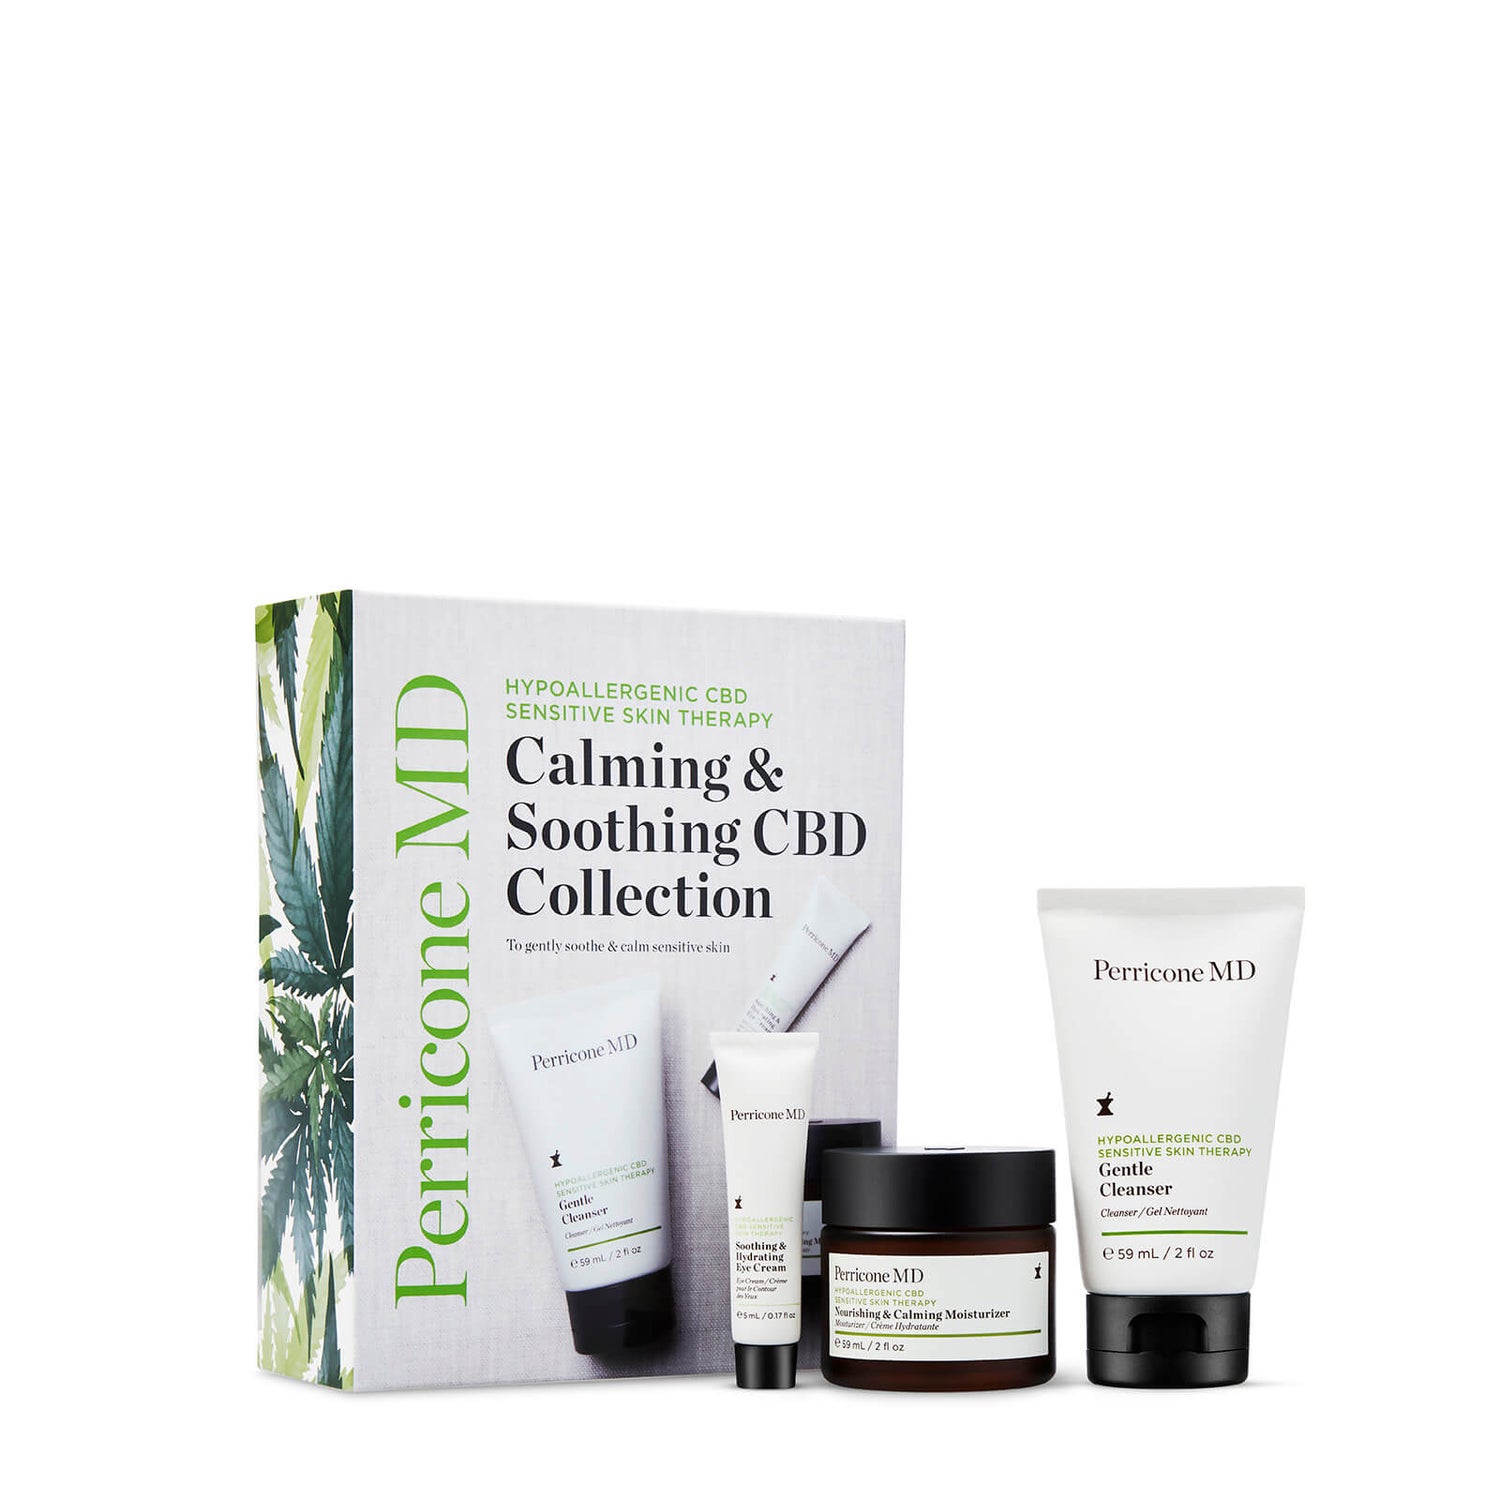 Perricone MD Hypoallergenic CBD Sensitive Skin Therapy Calming & Soothing CBD Collection (Worth £94.00)